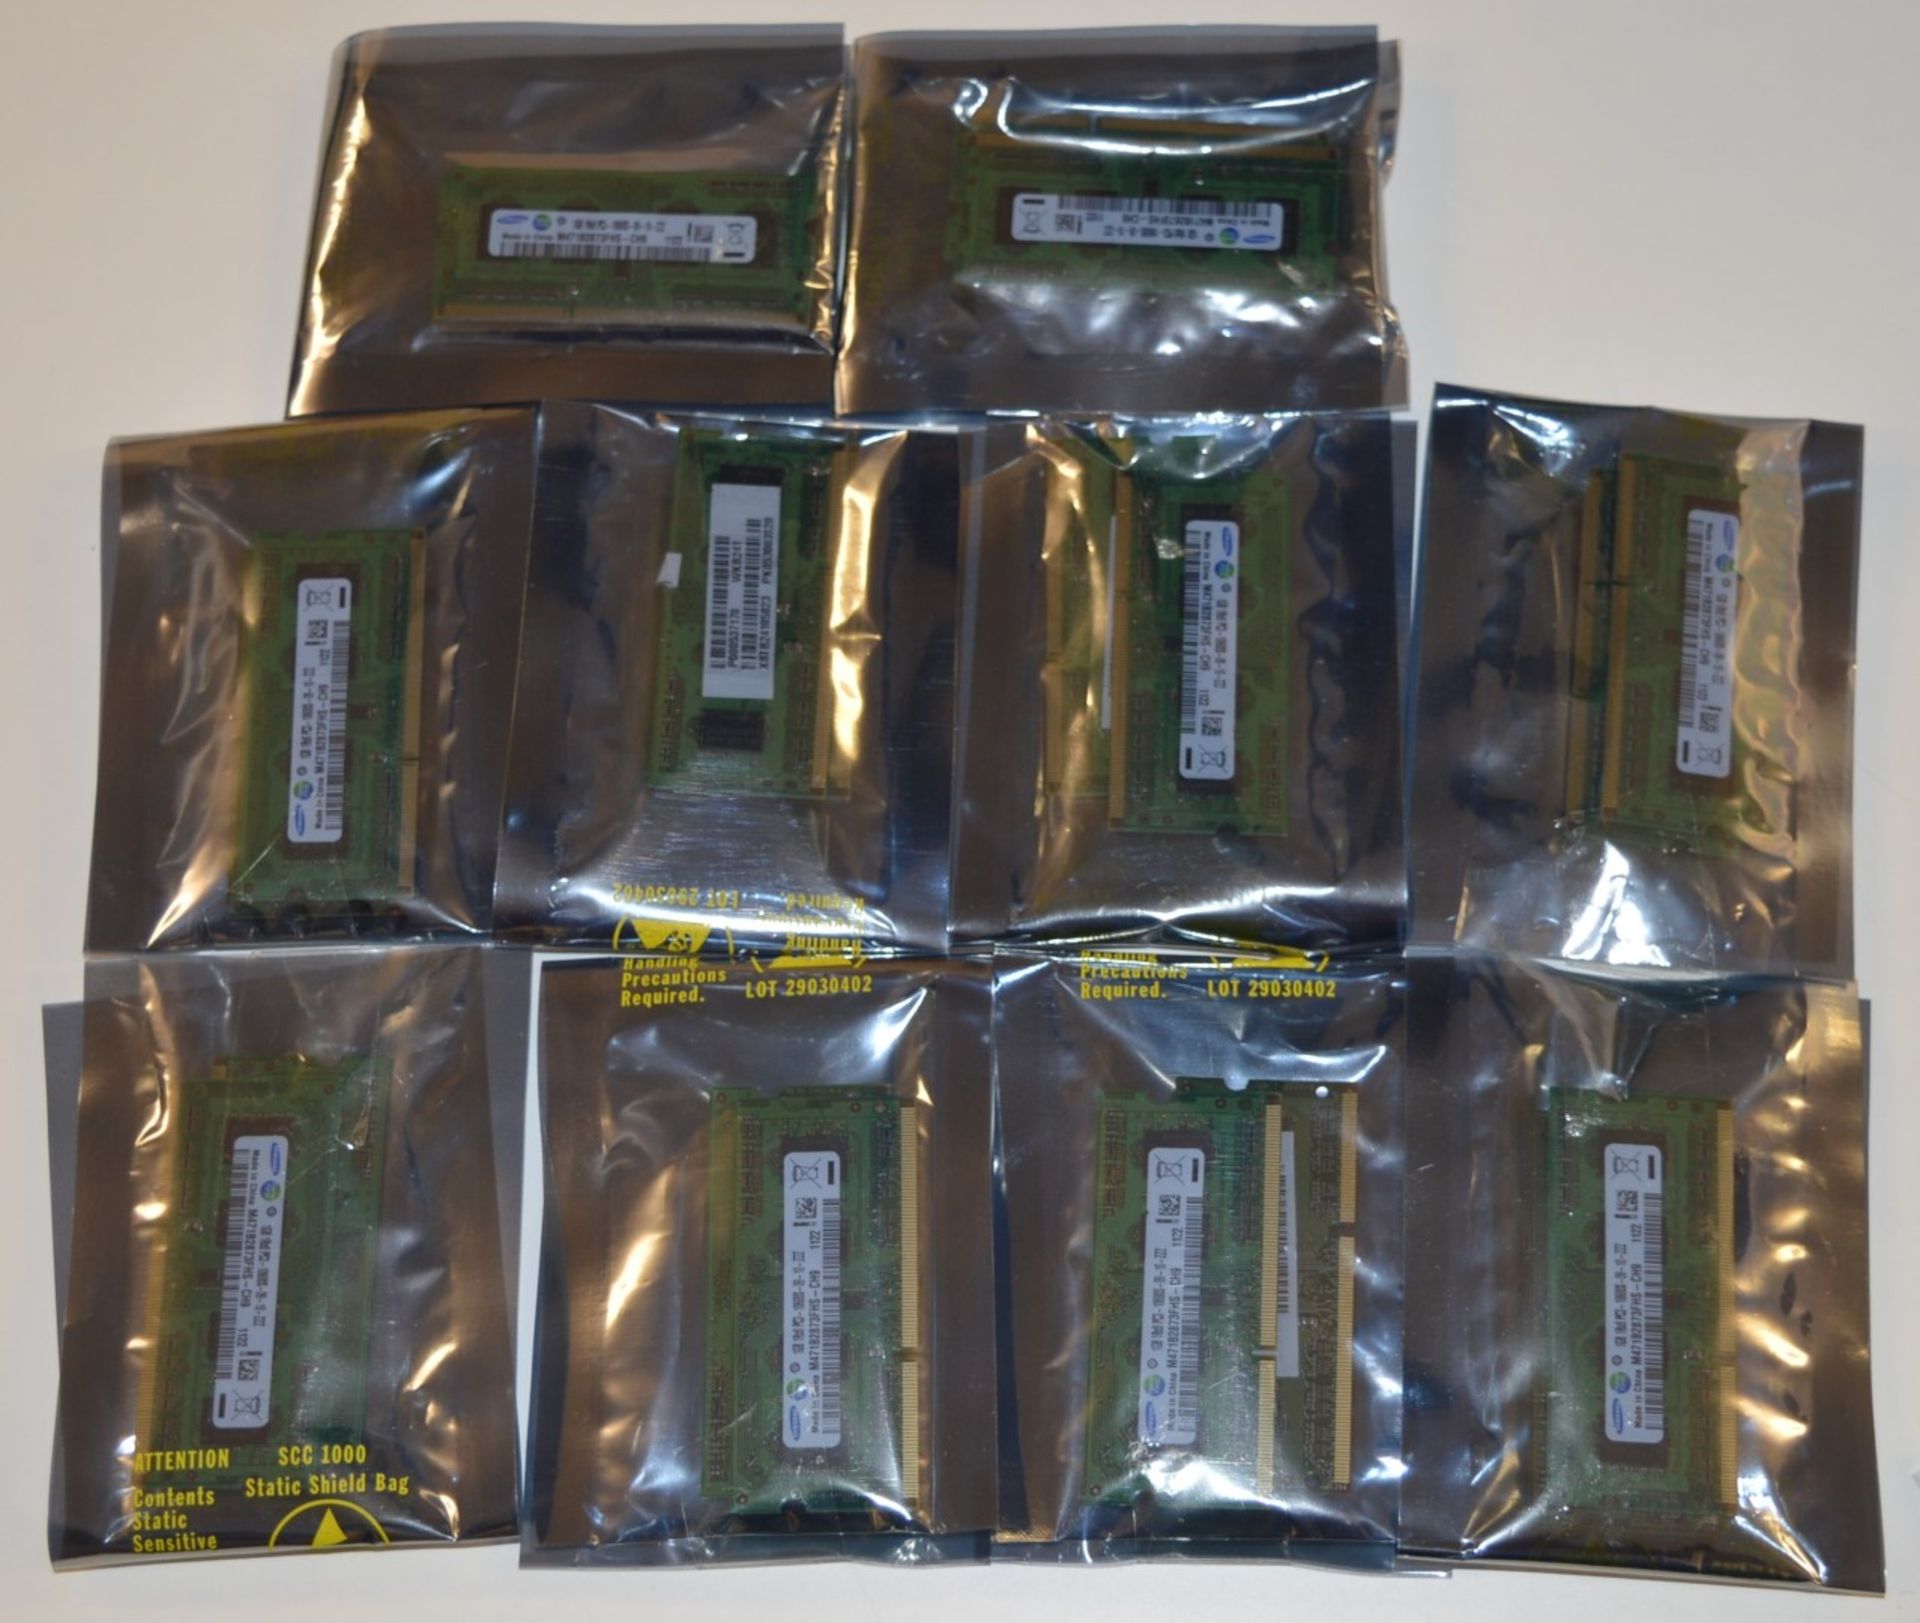 40 x Samsung 1gb DDR3 1333mhz Laptop Ram Modules - In Anti Static Bags - Removed From Working